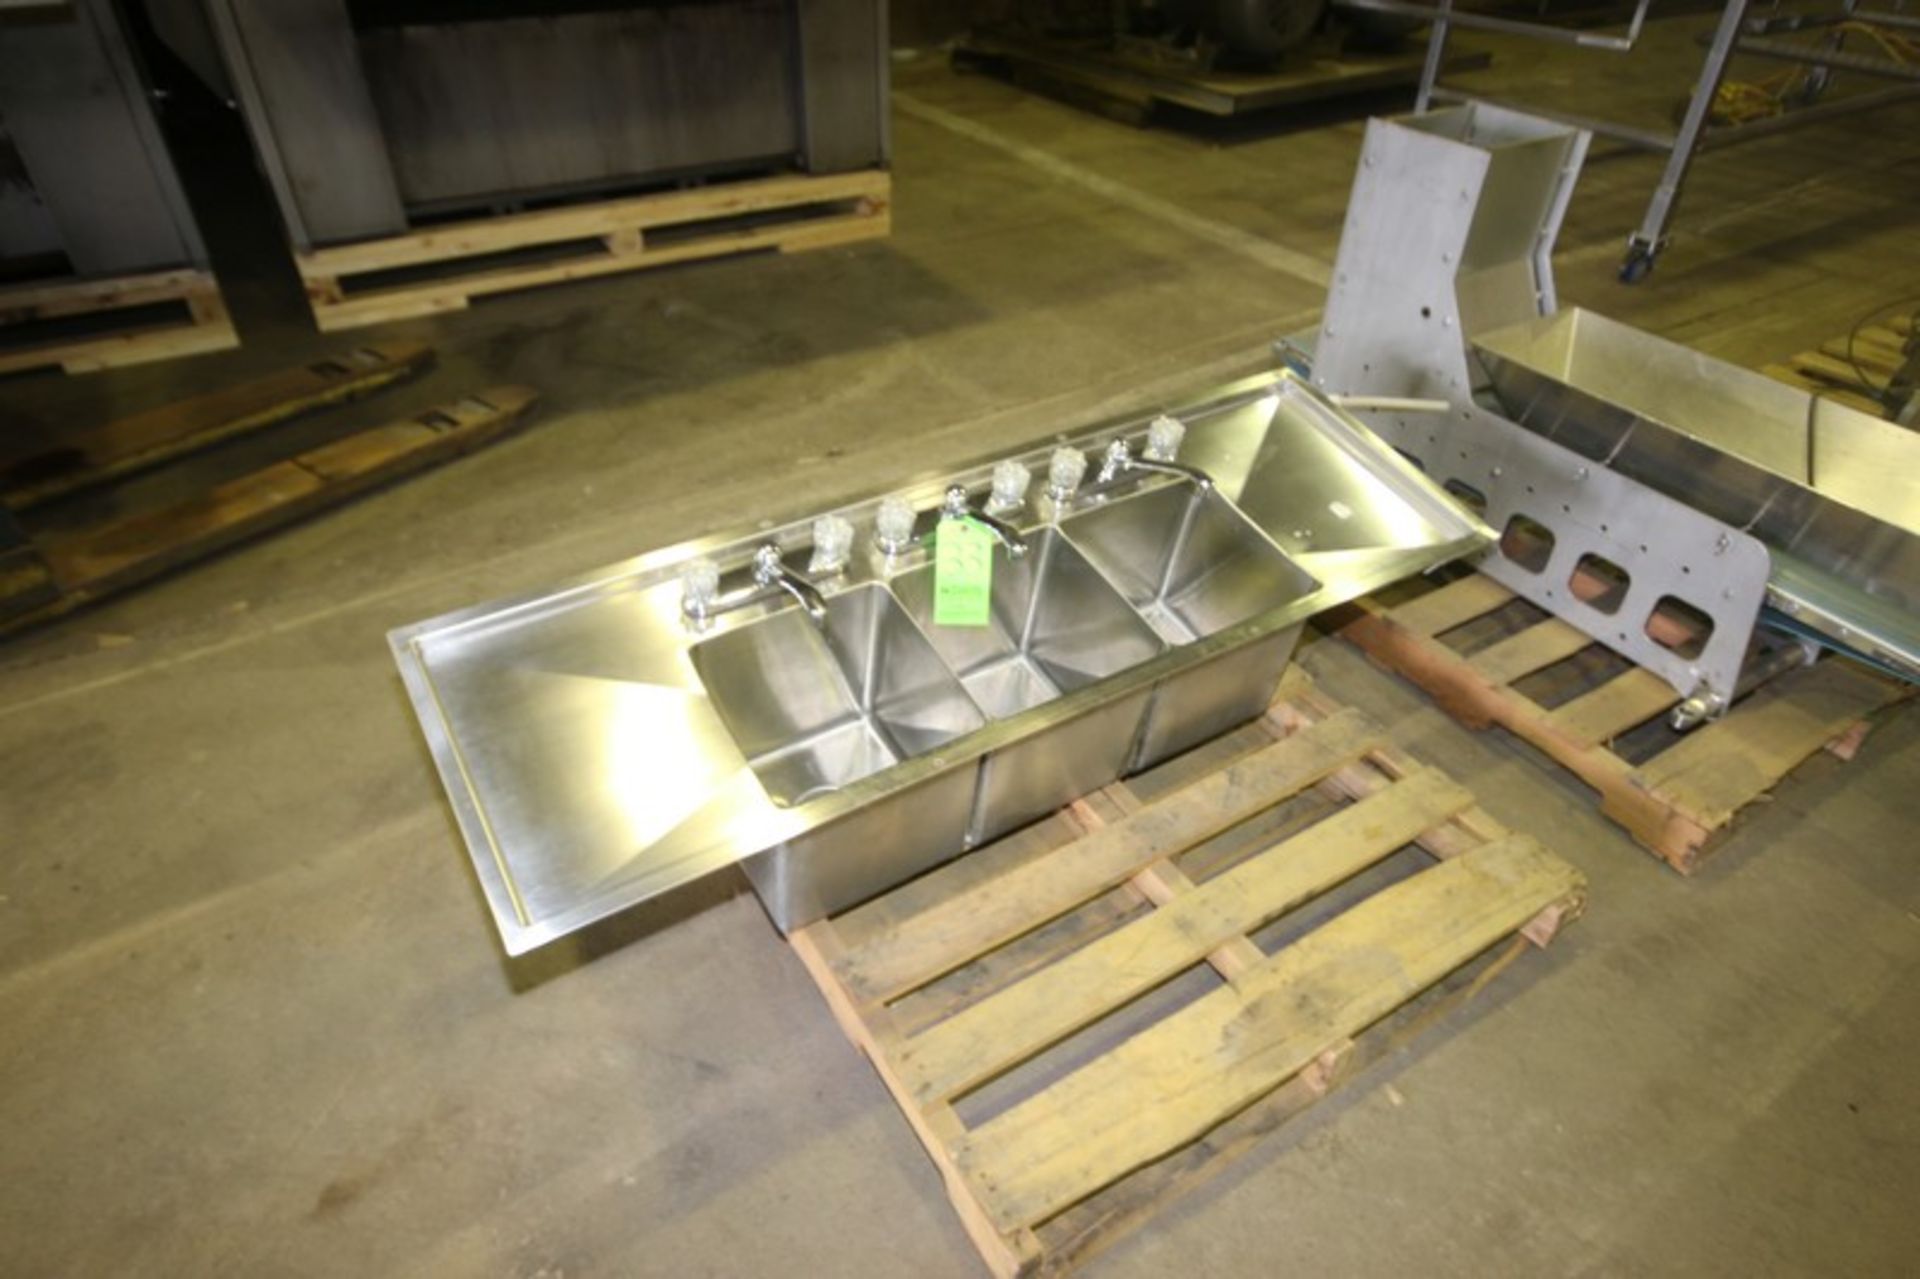 Triple Bowl S/S Sink, Overall Dims.: Aprox. 62" L x 20" W (LOCATED IN MEDFORD, WI) (Rigging, Loading